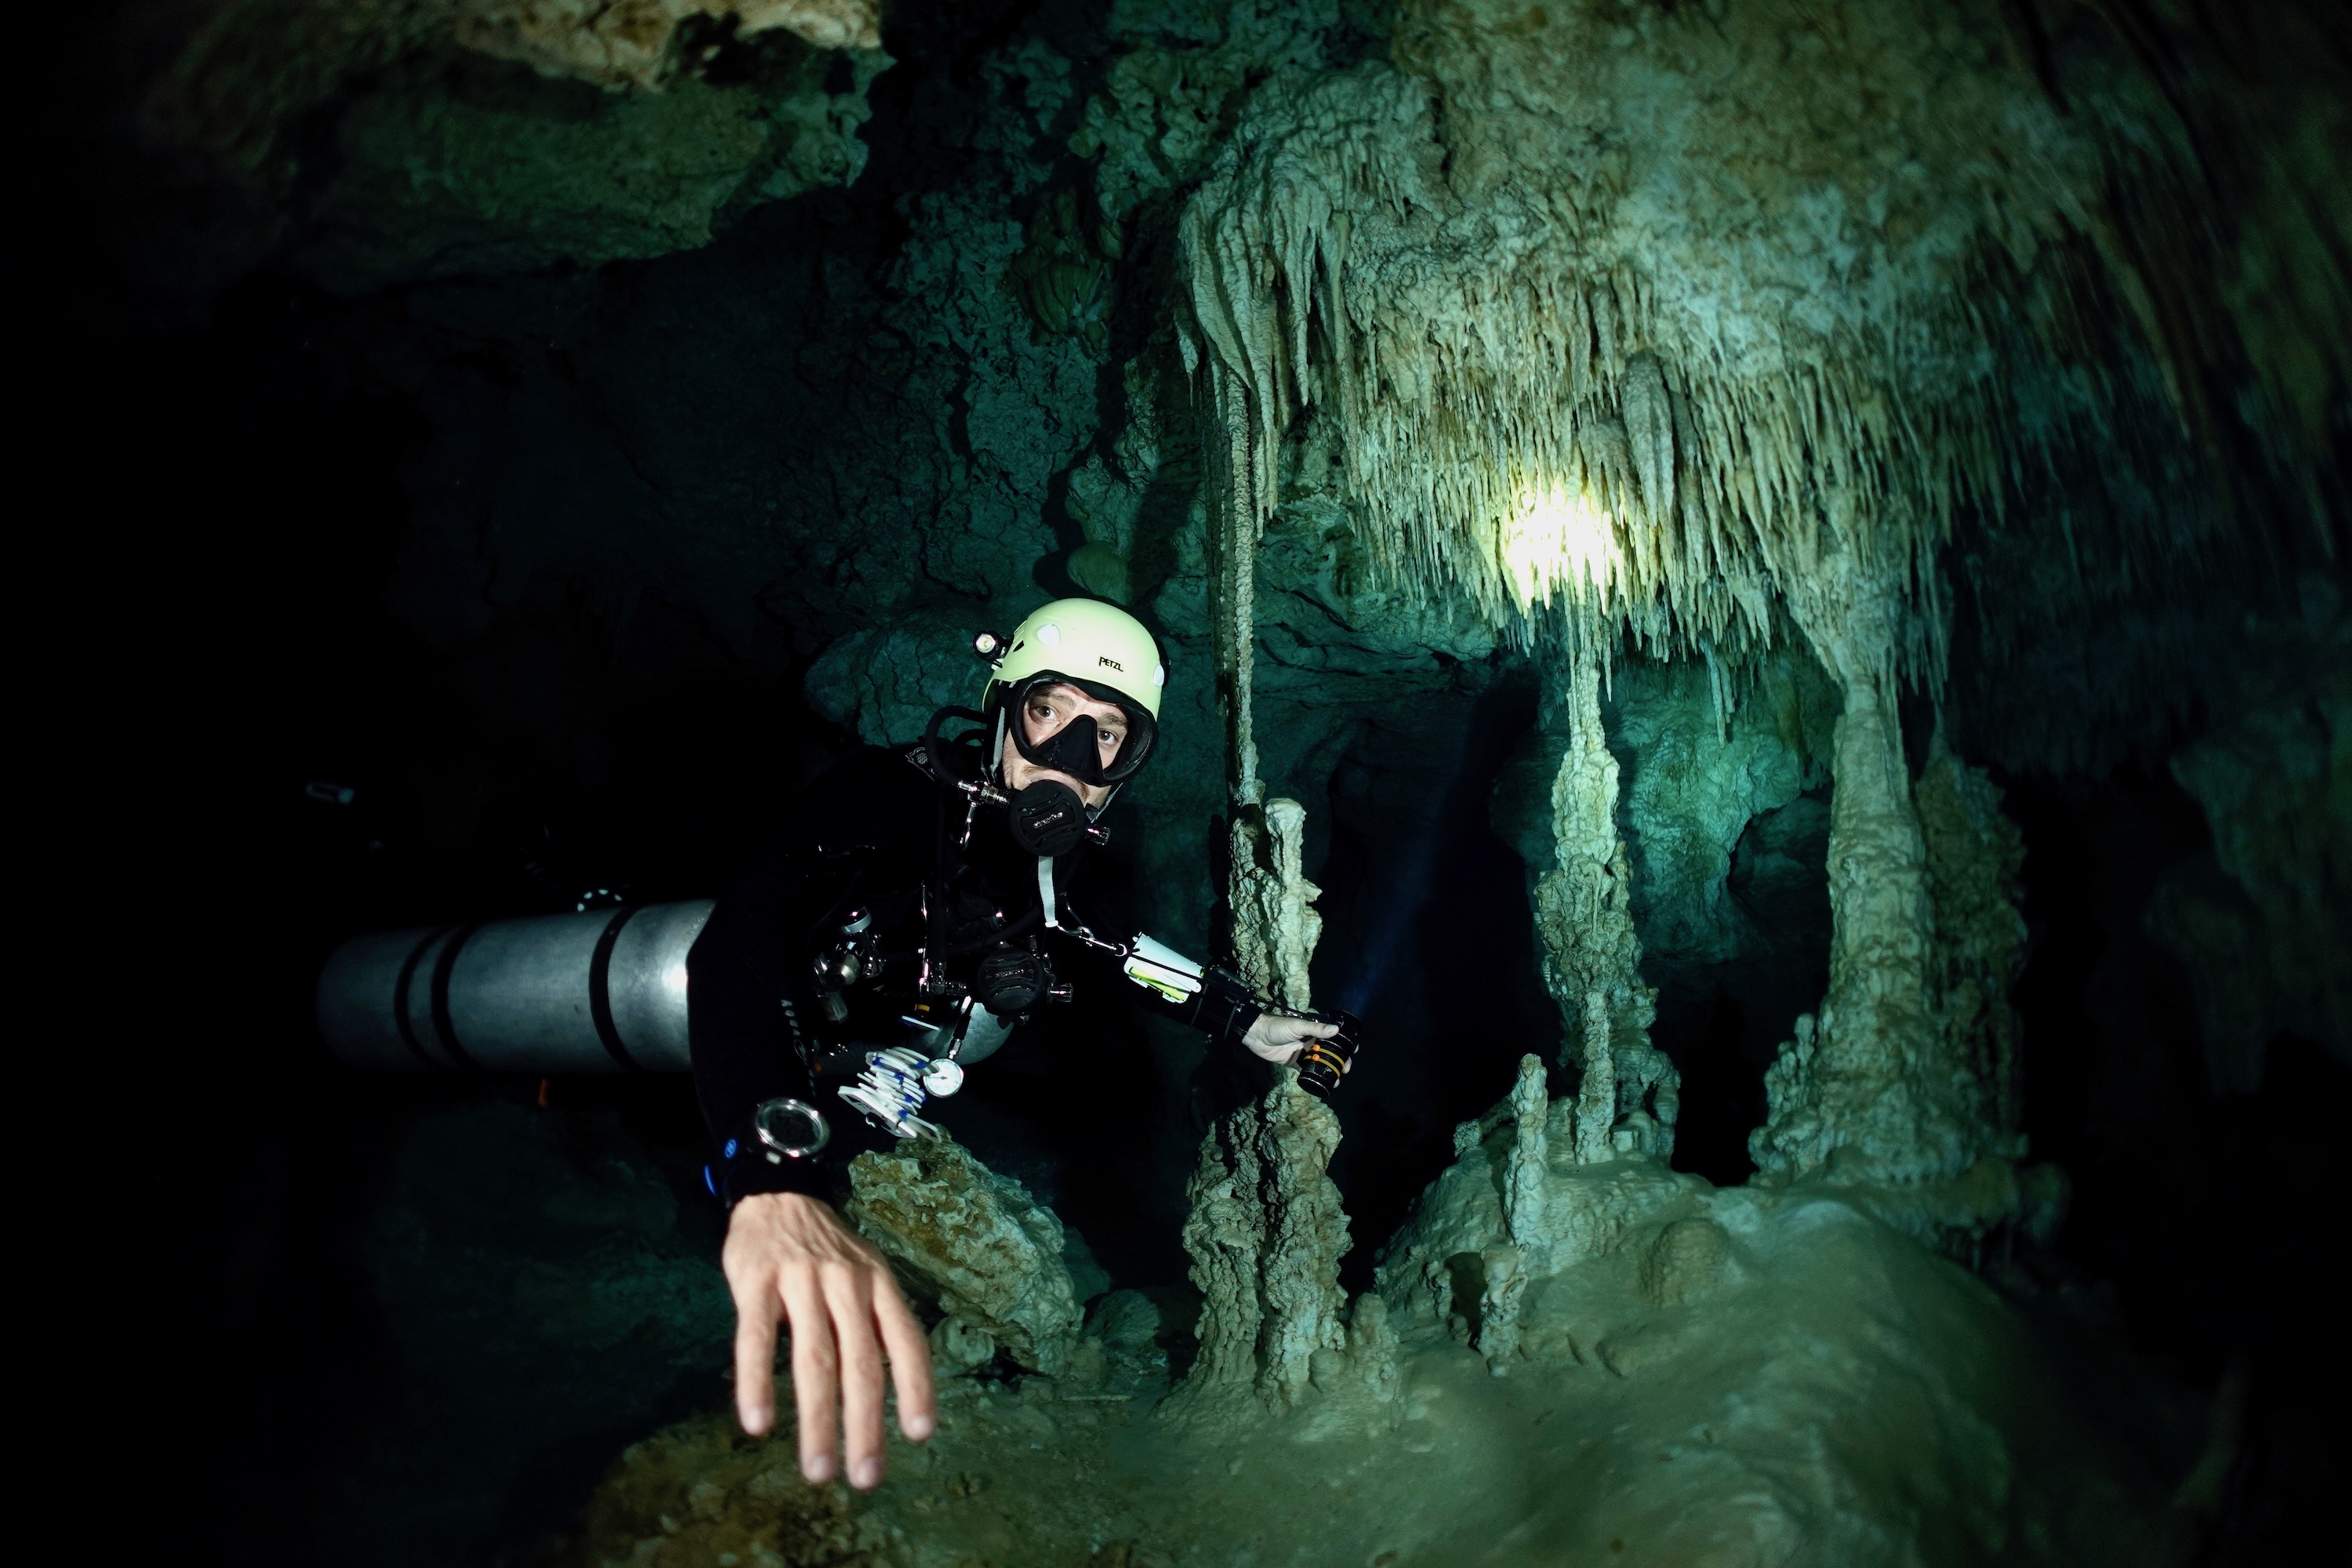 Diver and exquisite pillars in Cenote Chan Hol. Photo by Pierre Constant